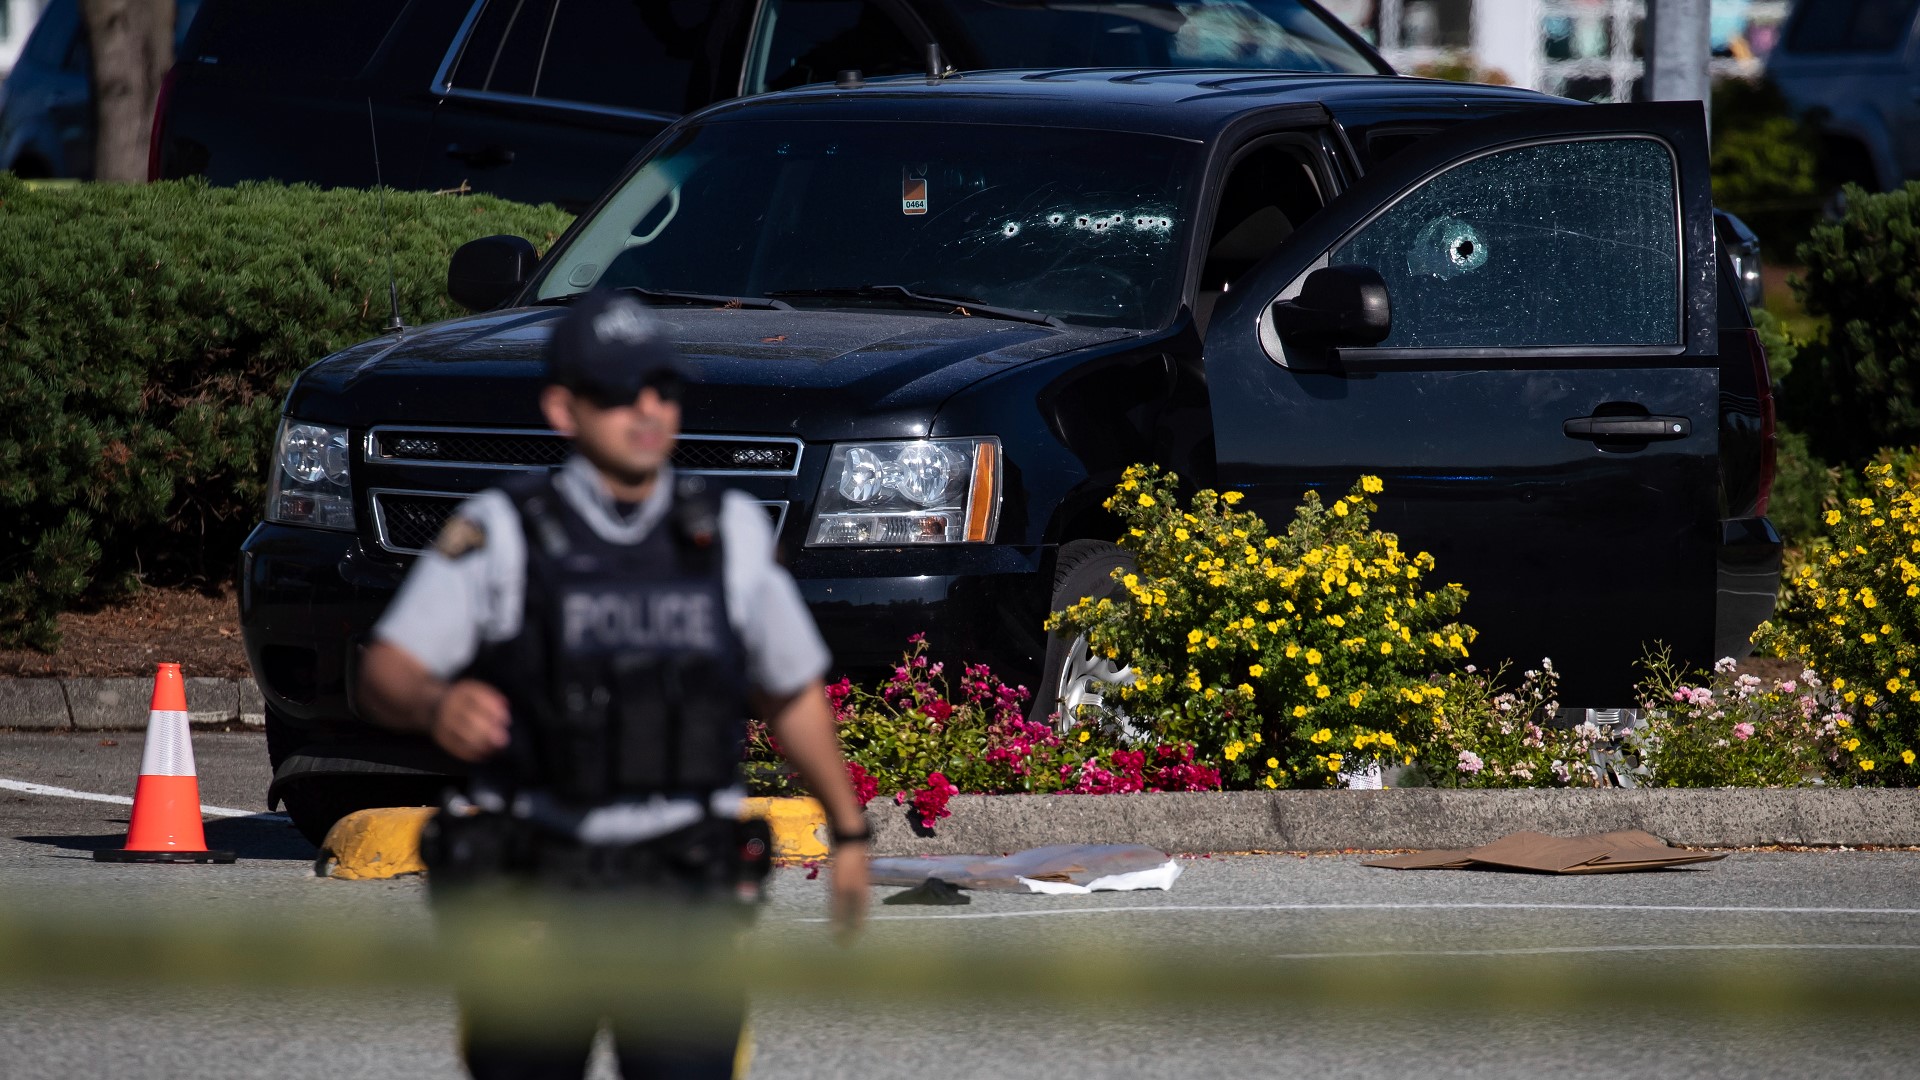 Authorities say a man who targeted homeless people fatally shot two men in a Vancouver, British Columbia, suburb before being shot and killed by police.